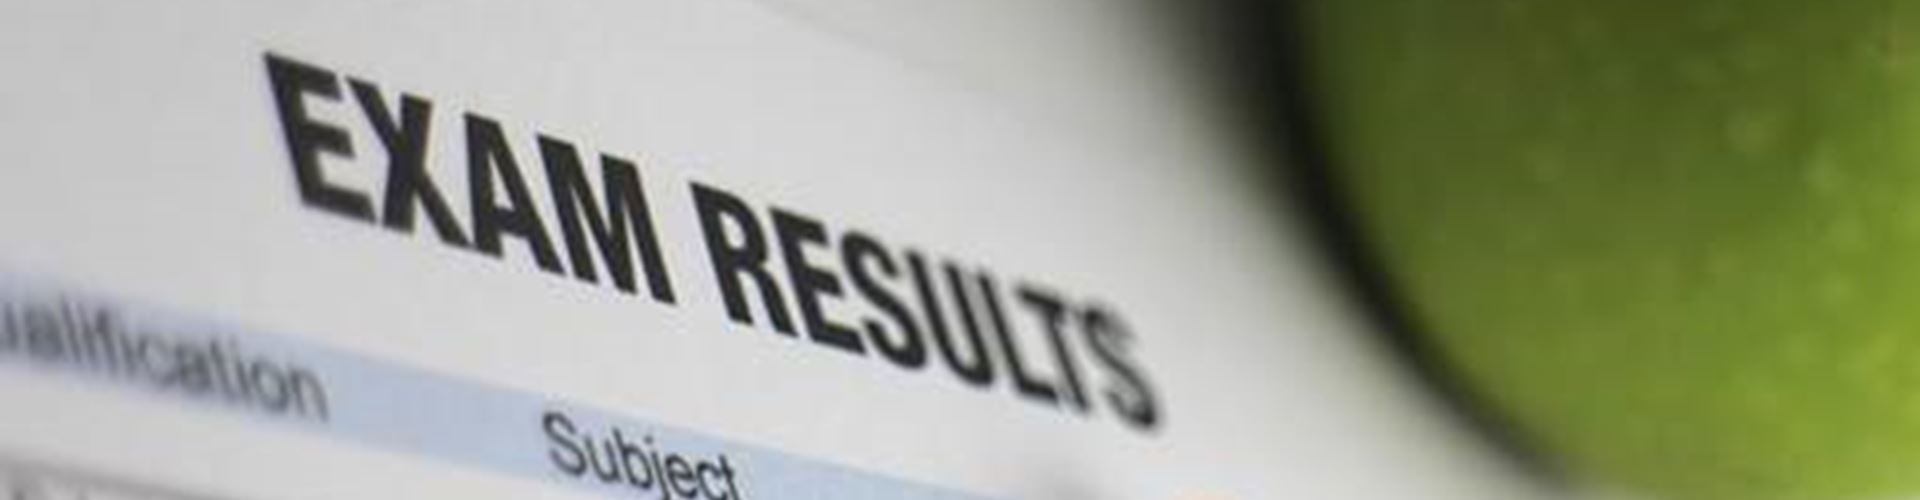 A-level results see drop in top grades but more university places